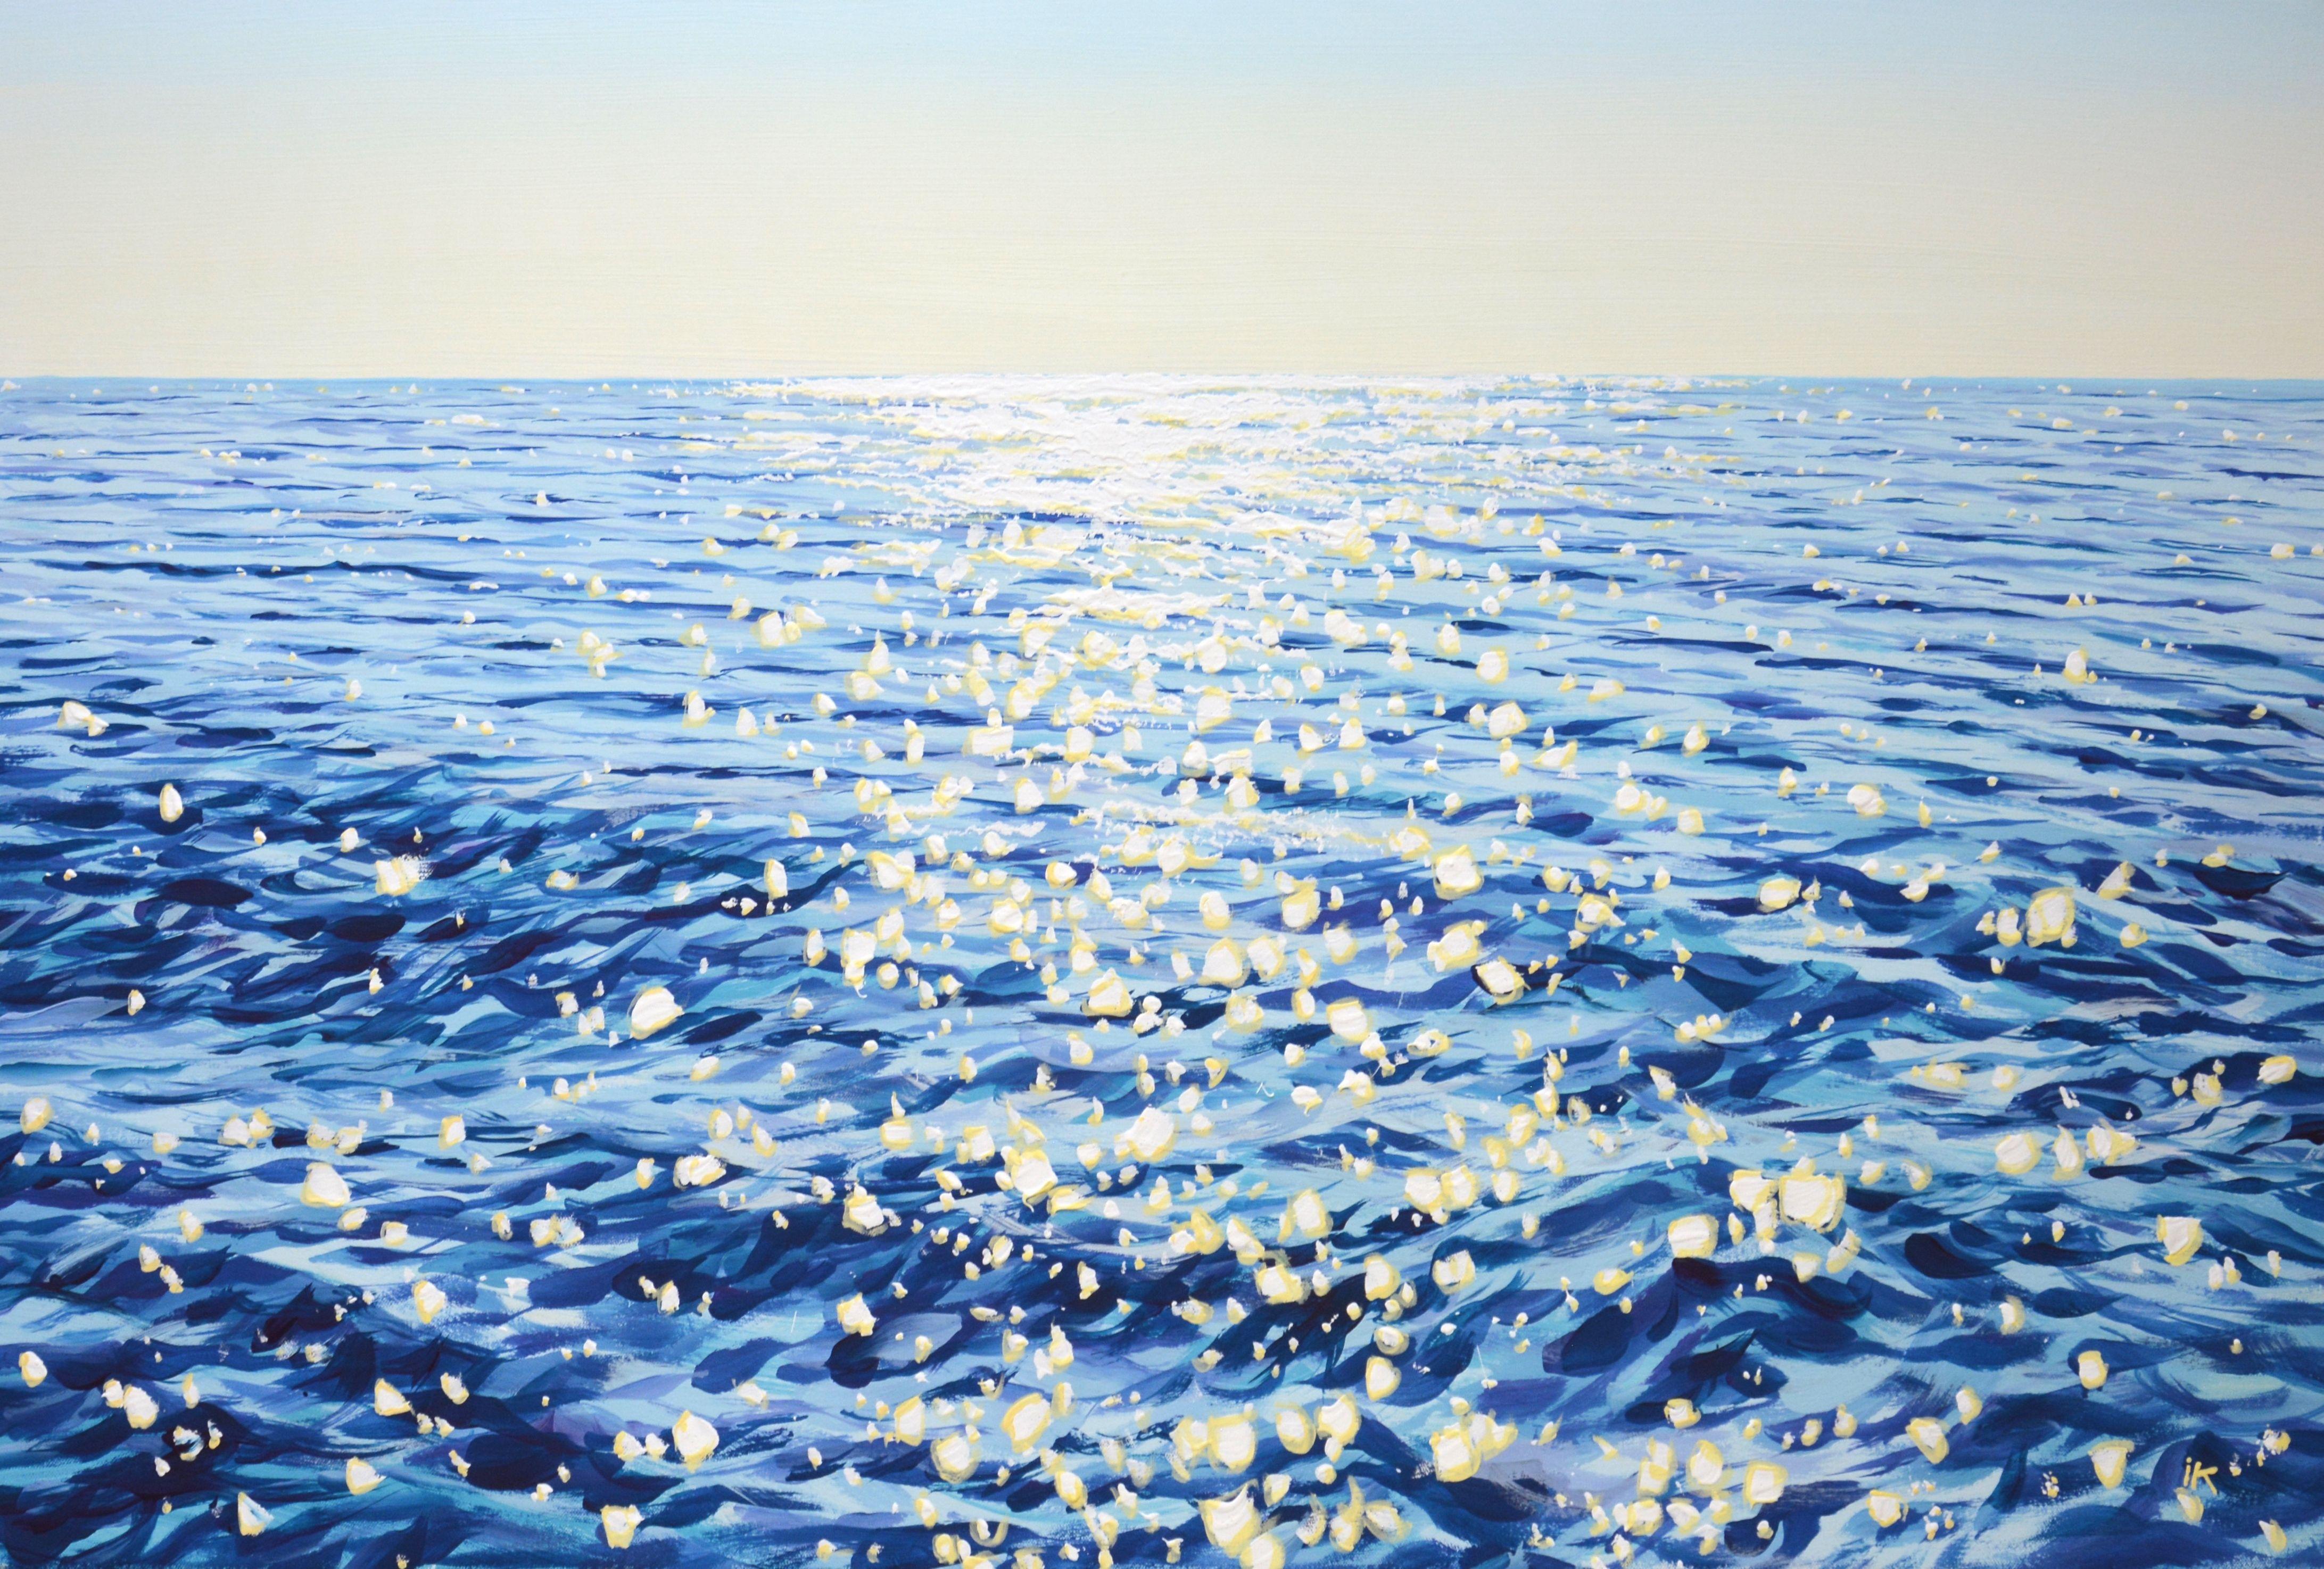 Light on the water 10.  Summer seascape: blue water, ocean, small waves, sun glare on the water, clear sky create an atmosphere of relaxation and romance. The blue and white palette, executed in the style of realism, emphasizes the energy of the